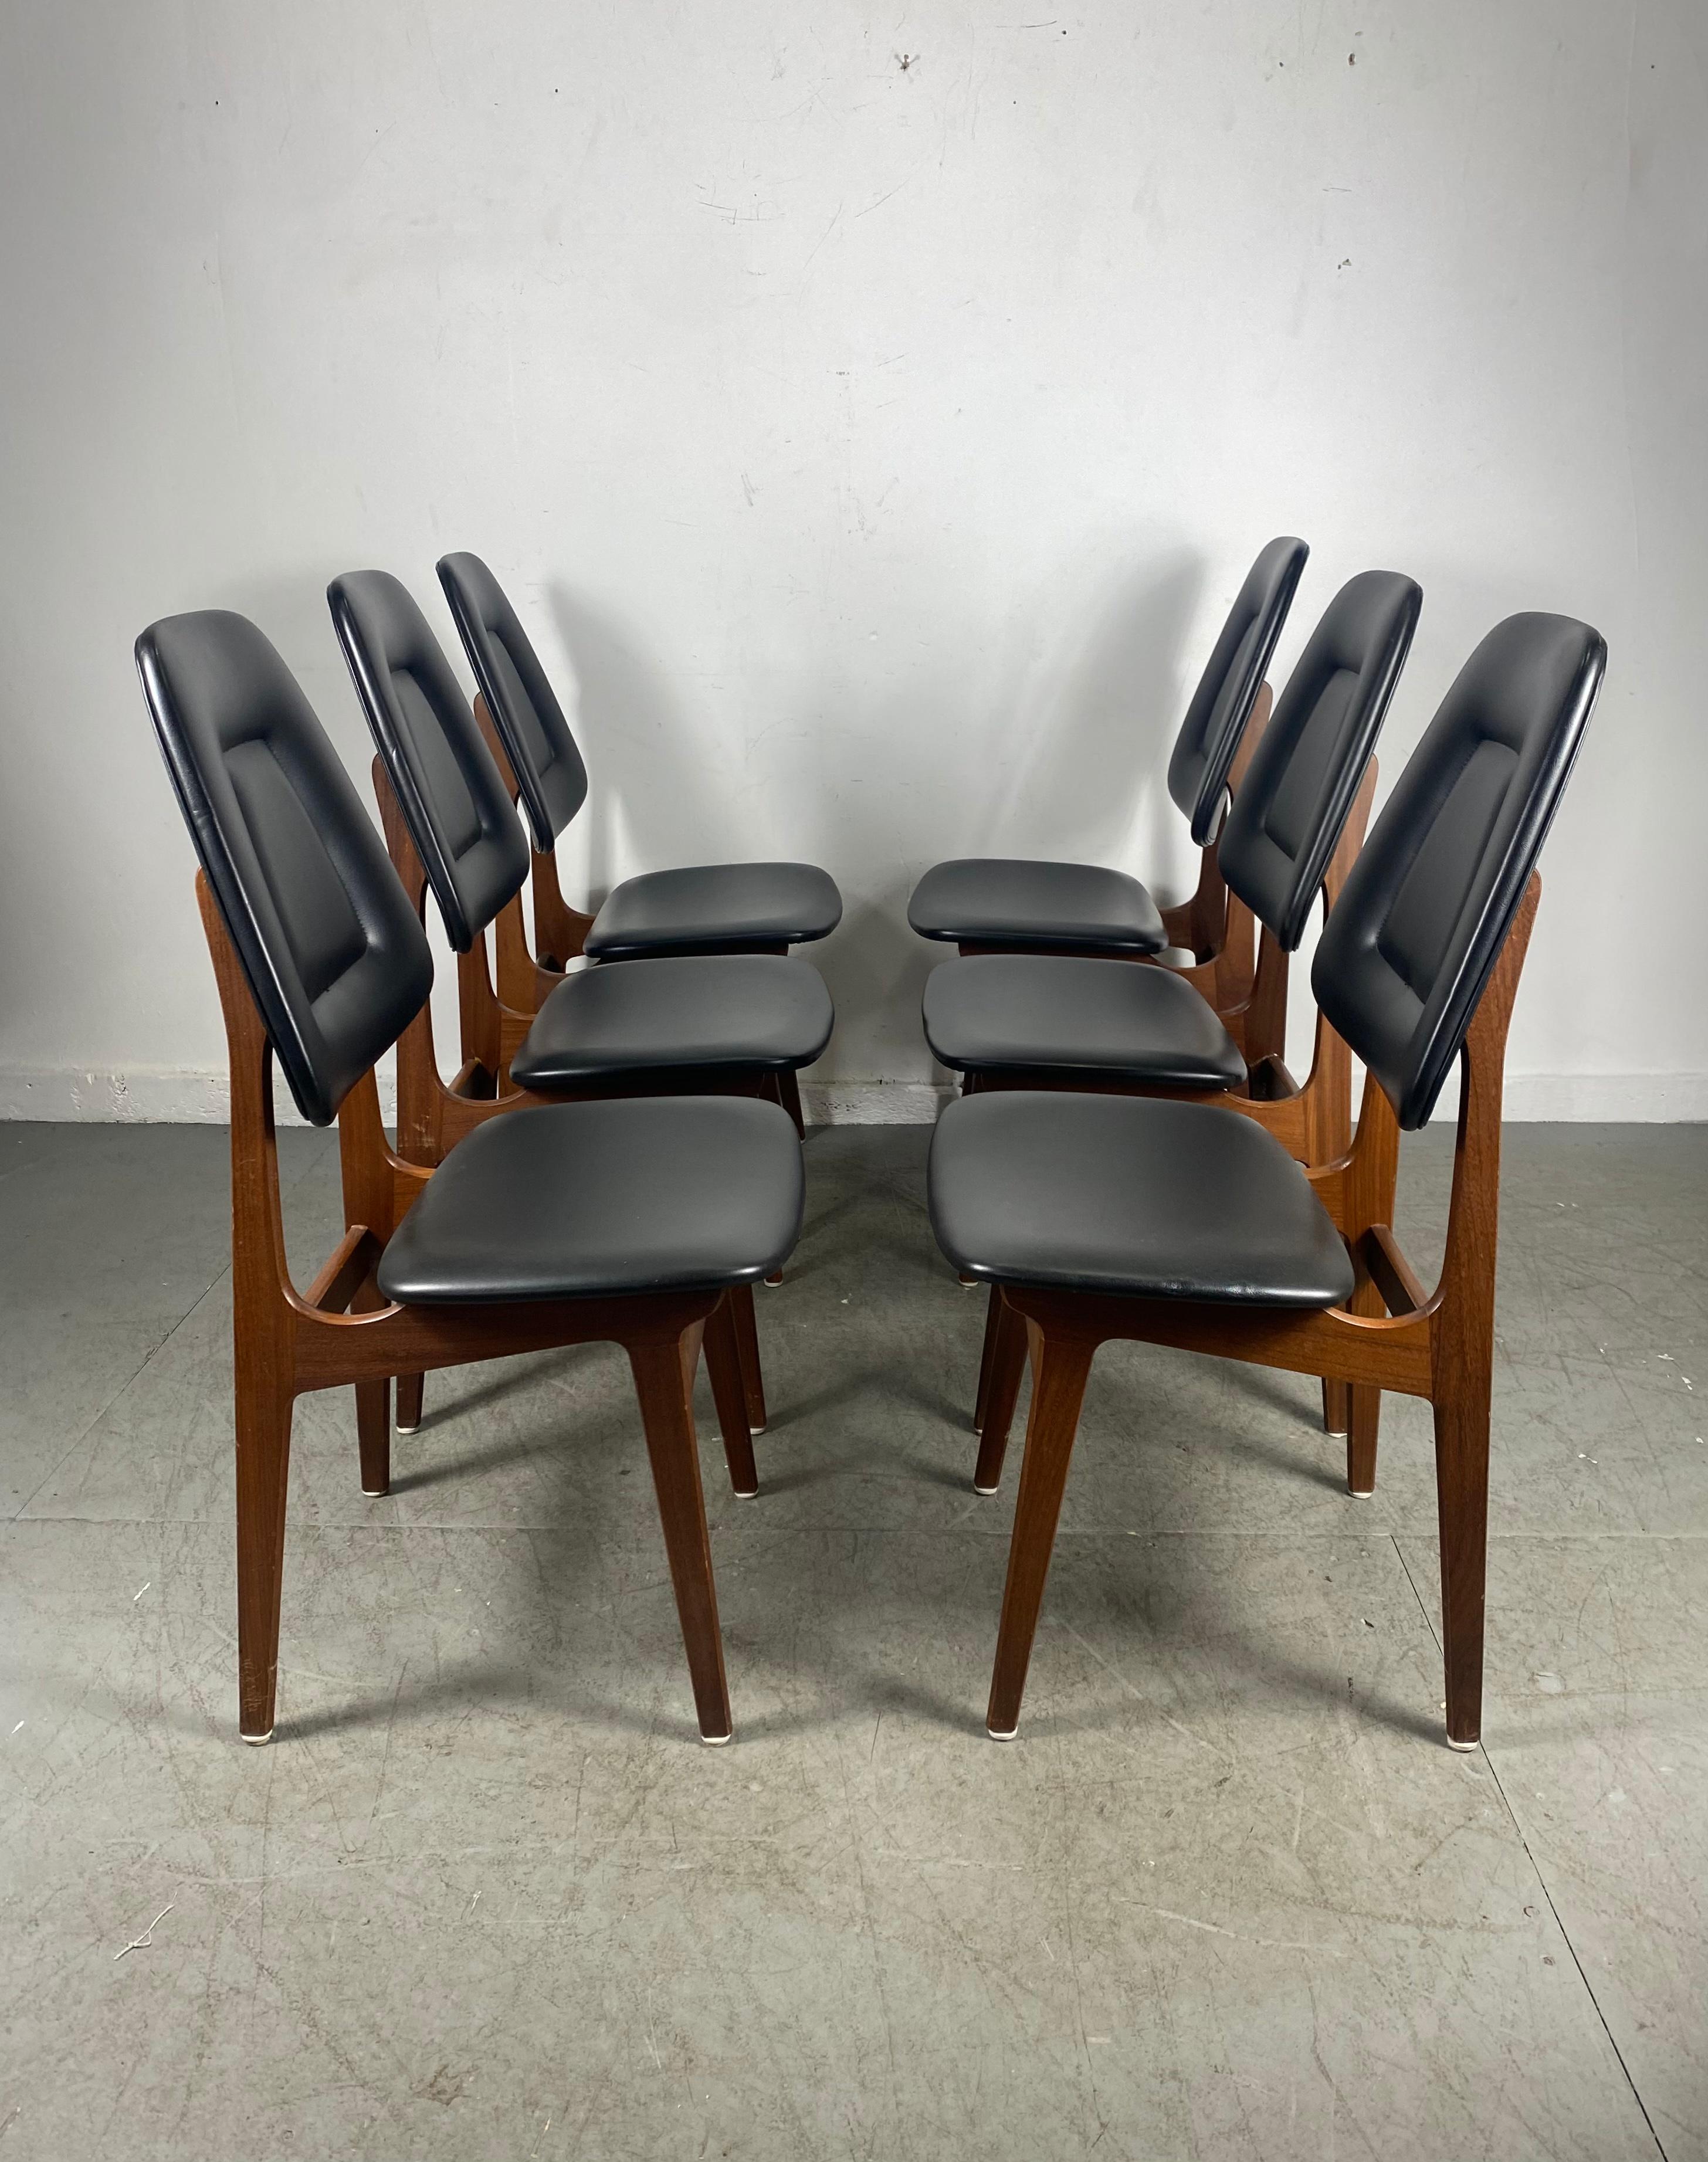 Set of six teak dining chairs with original black faux-leather upholstery by Brødrene Sørheim. The chairs are in very good vintage condition with signs of usage consistent with age. Structurally sound,, tight joints,, no wobble,,Extremely